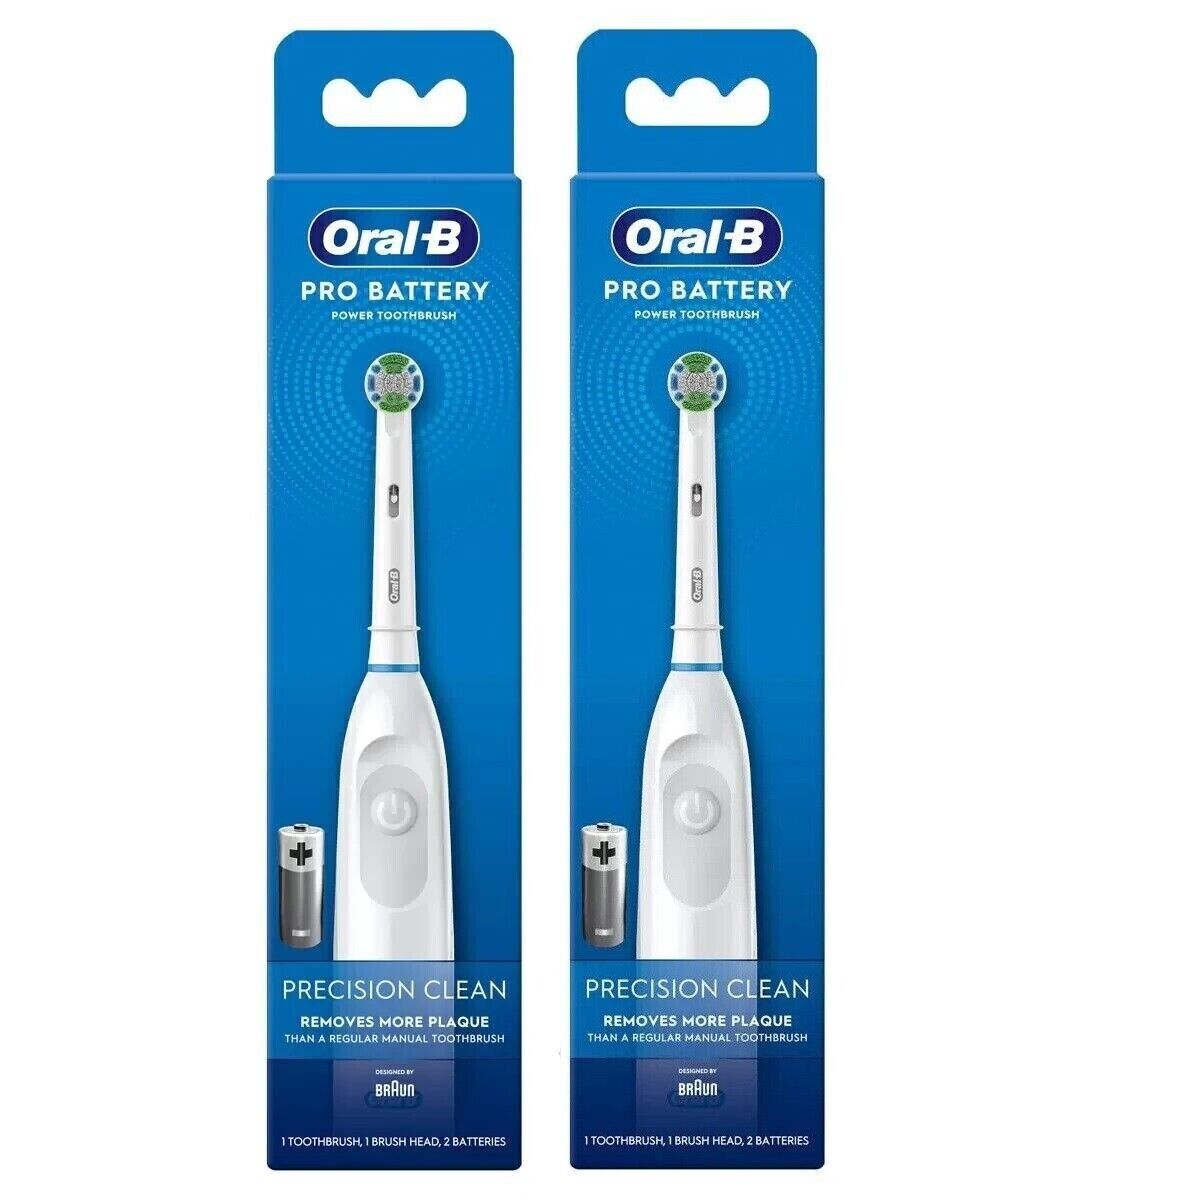 Oral-B Pro Battery Toothbrush - Twin Pack Bundle